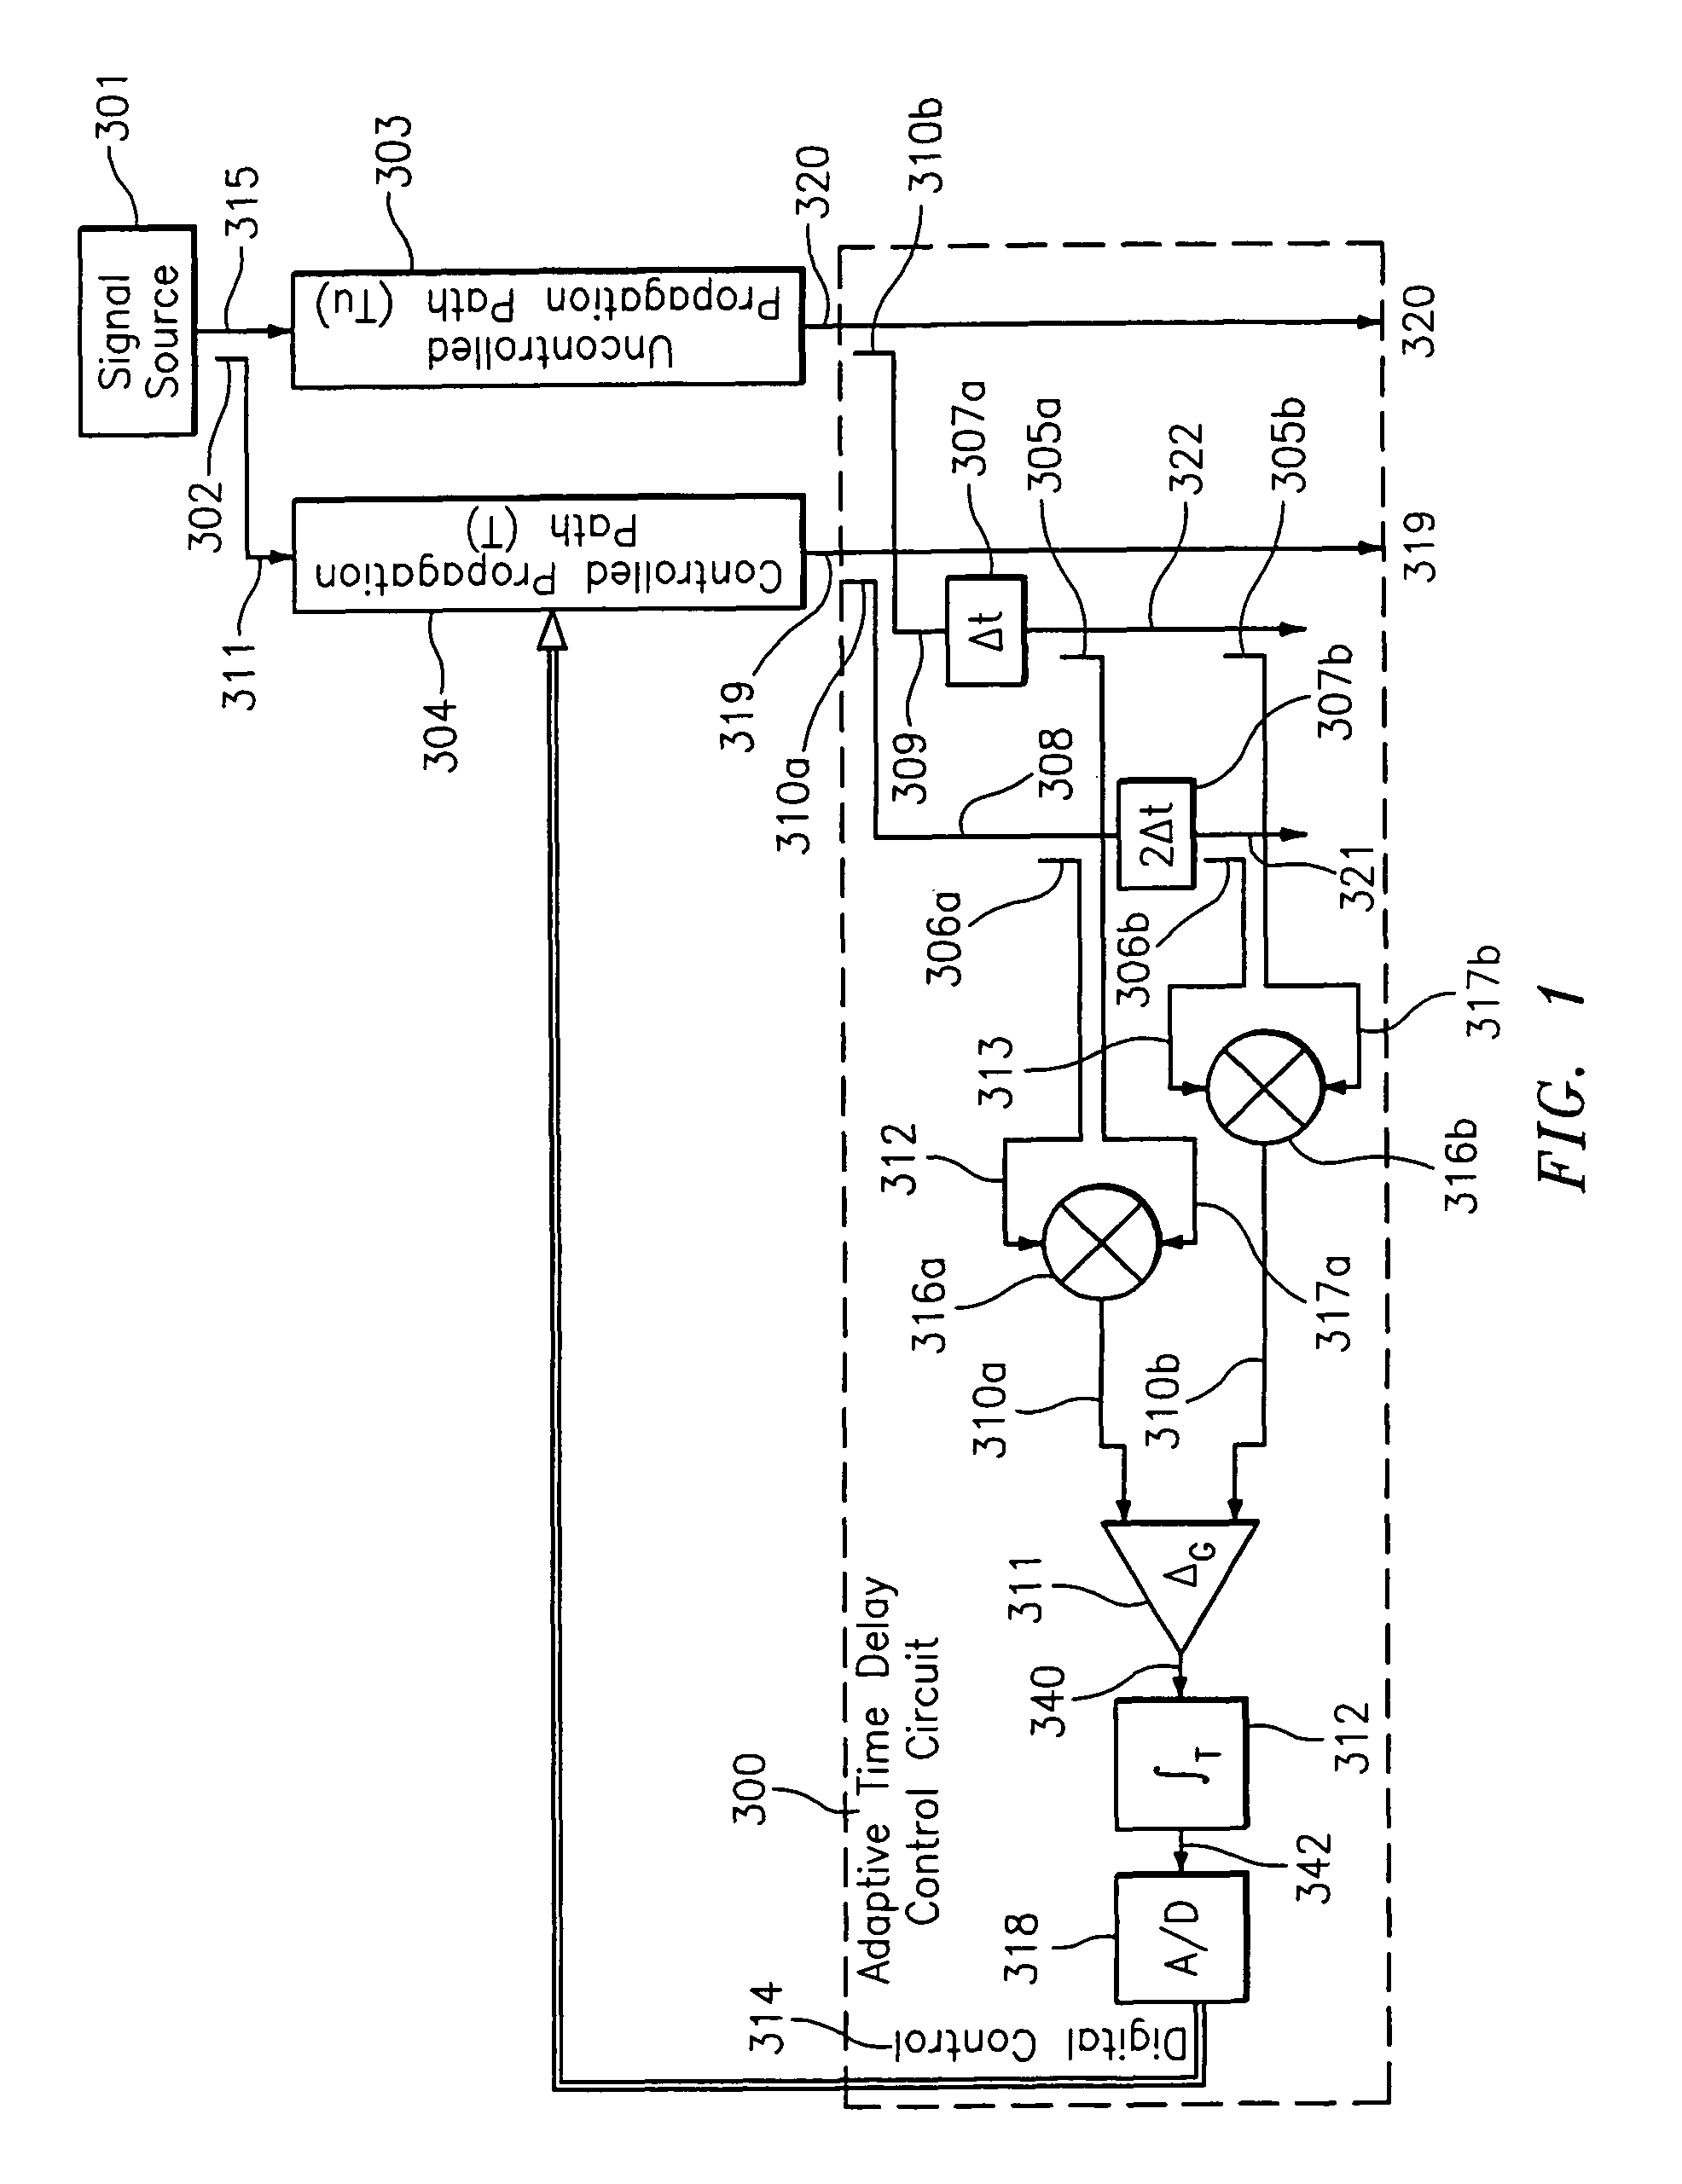 Variable time delay control structure for channel matching